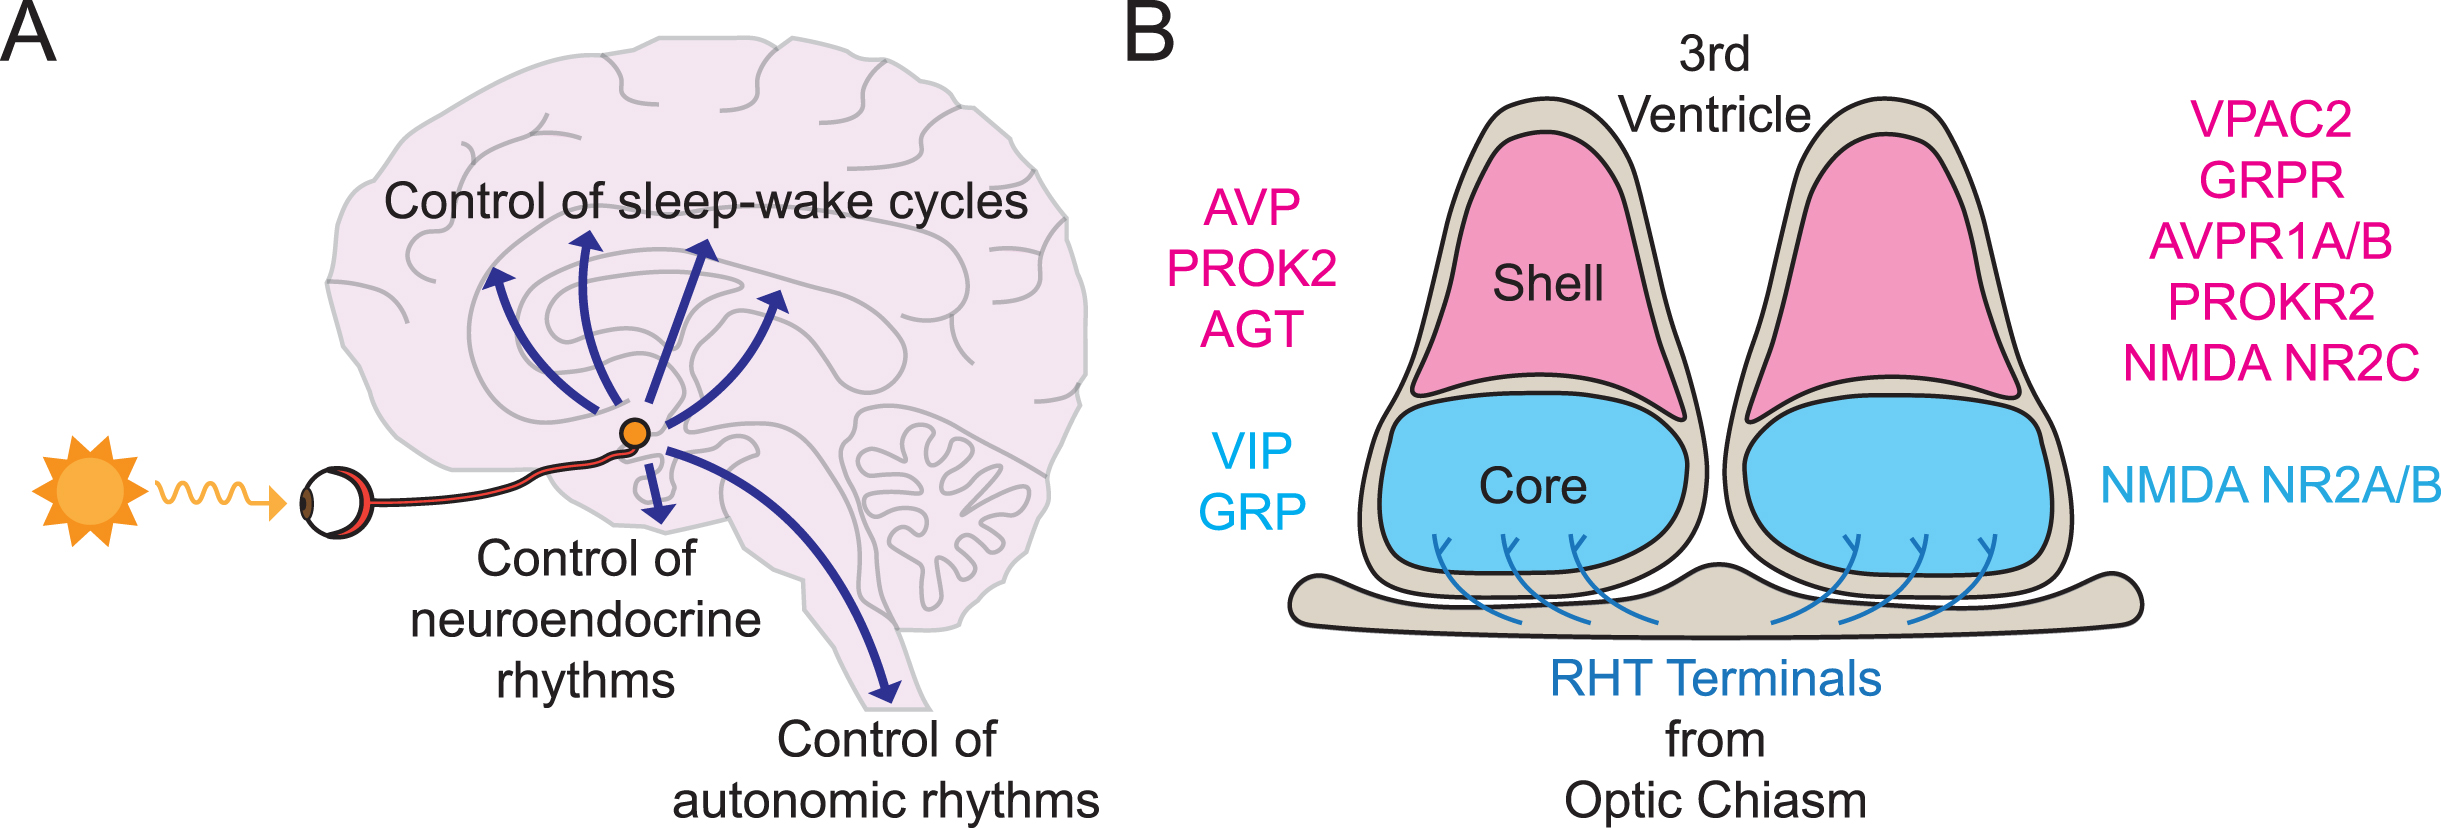 The suprachiasmatic nucleus (SCN) as central circadian pacemaker. A) Schematic sagittal view of the location of the human SCN, at the base of the hypothalamus, depicting retinal input from the retinohypothalamic tract (RHT) via the optic nerve, and outputs to neural centers controlling sleep-wake behavior, neuroendocrine and autonomic status. B) Schematic coronal view of mouse SCN to show ventral retinorecipient core and dorsal shell sub-divisions, characterized by their distinction expression of (left) neuropeptides and (right) neurotransmitter receptors, and RHT innervation of SCN core.